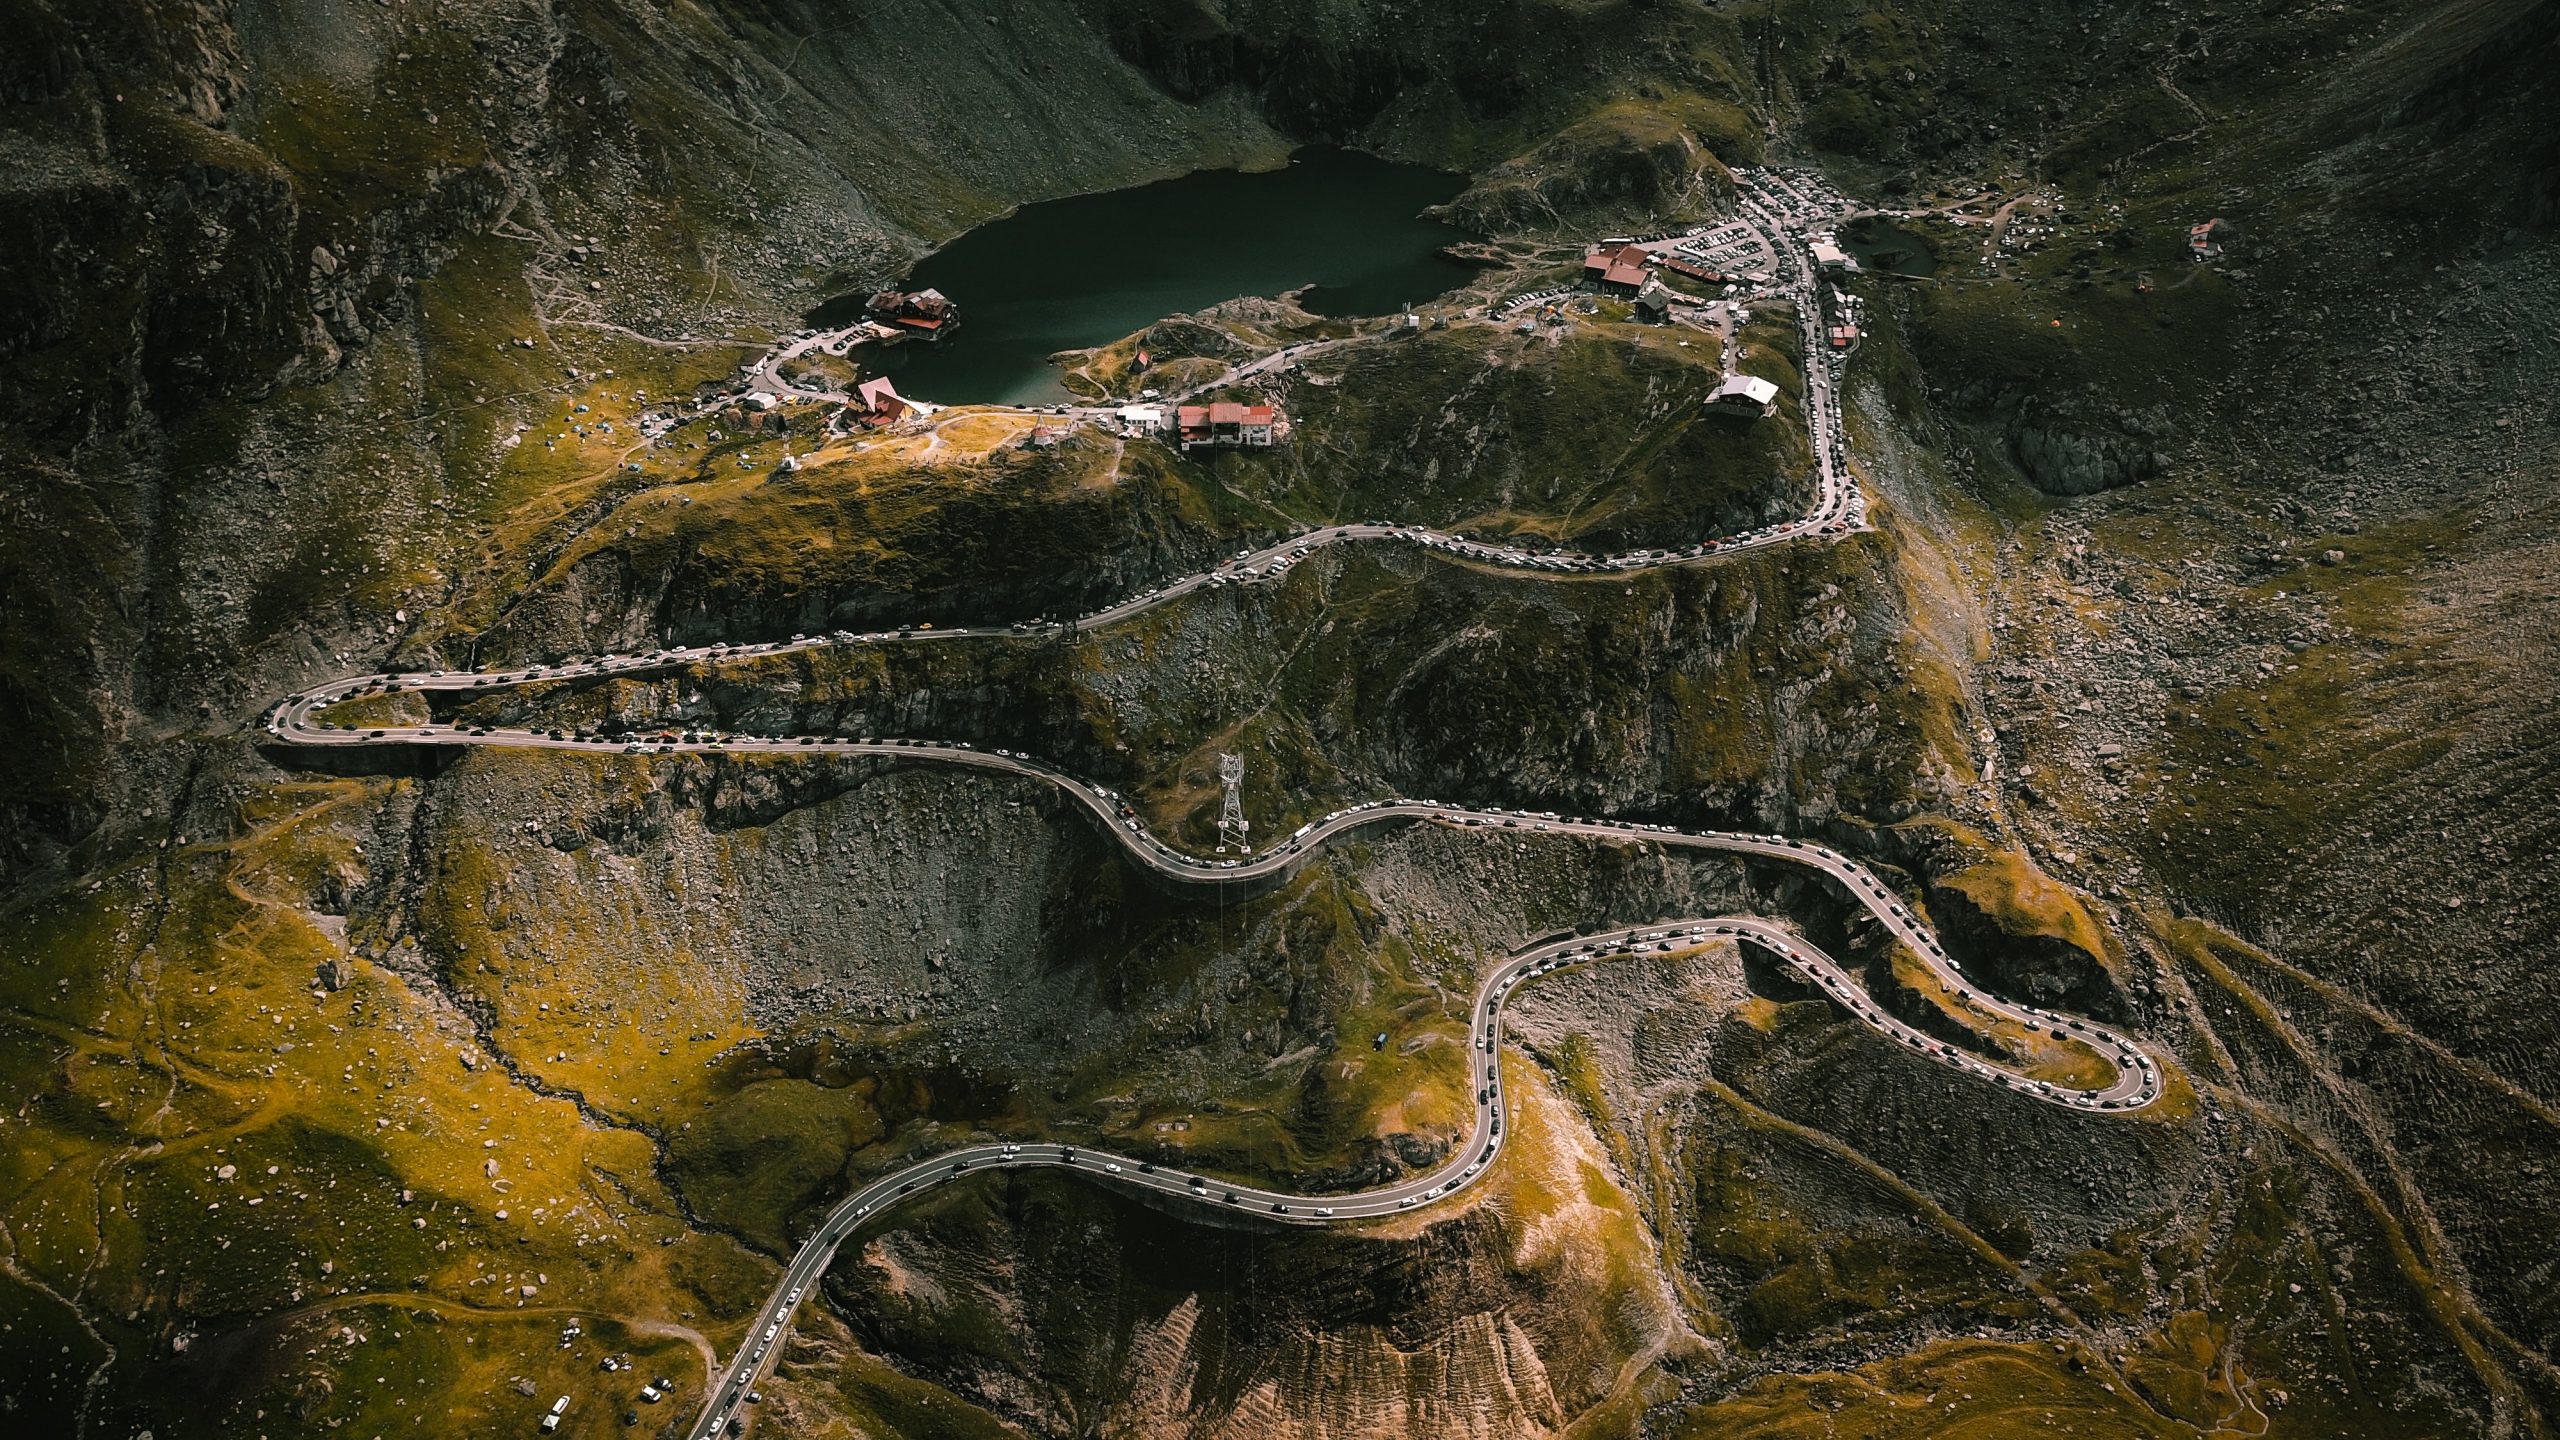 Visiting Transfagarasan on weekends can get really busy